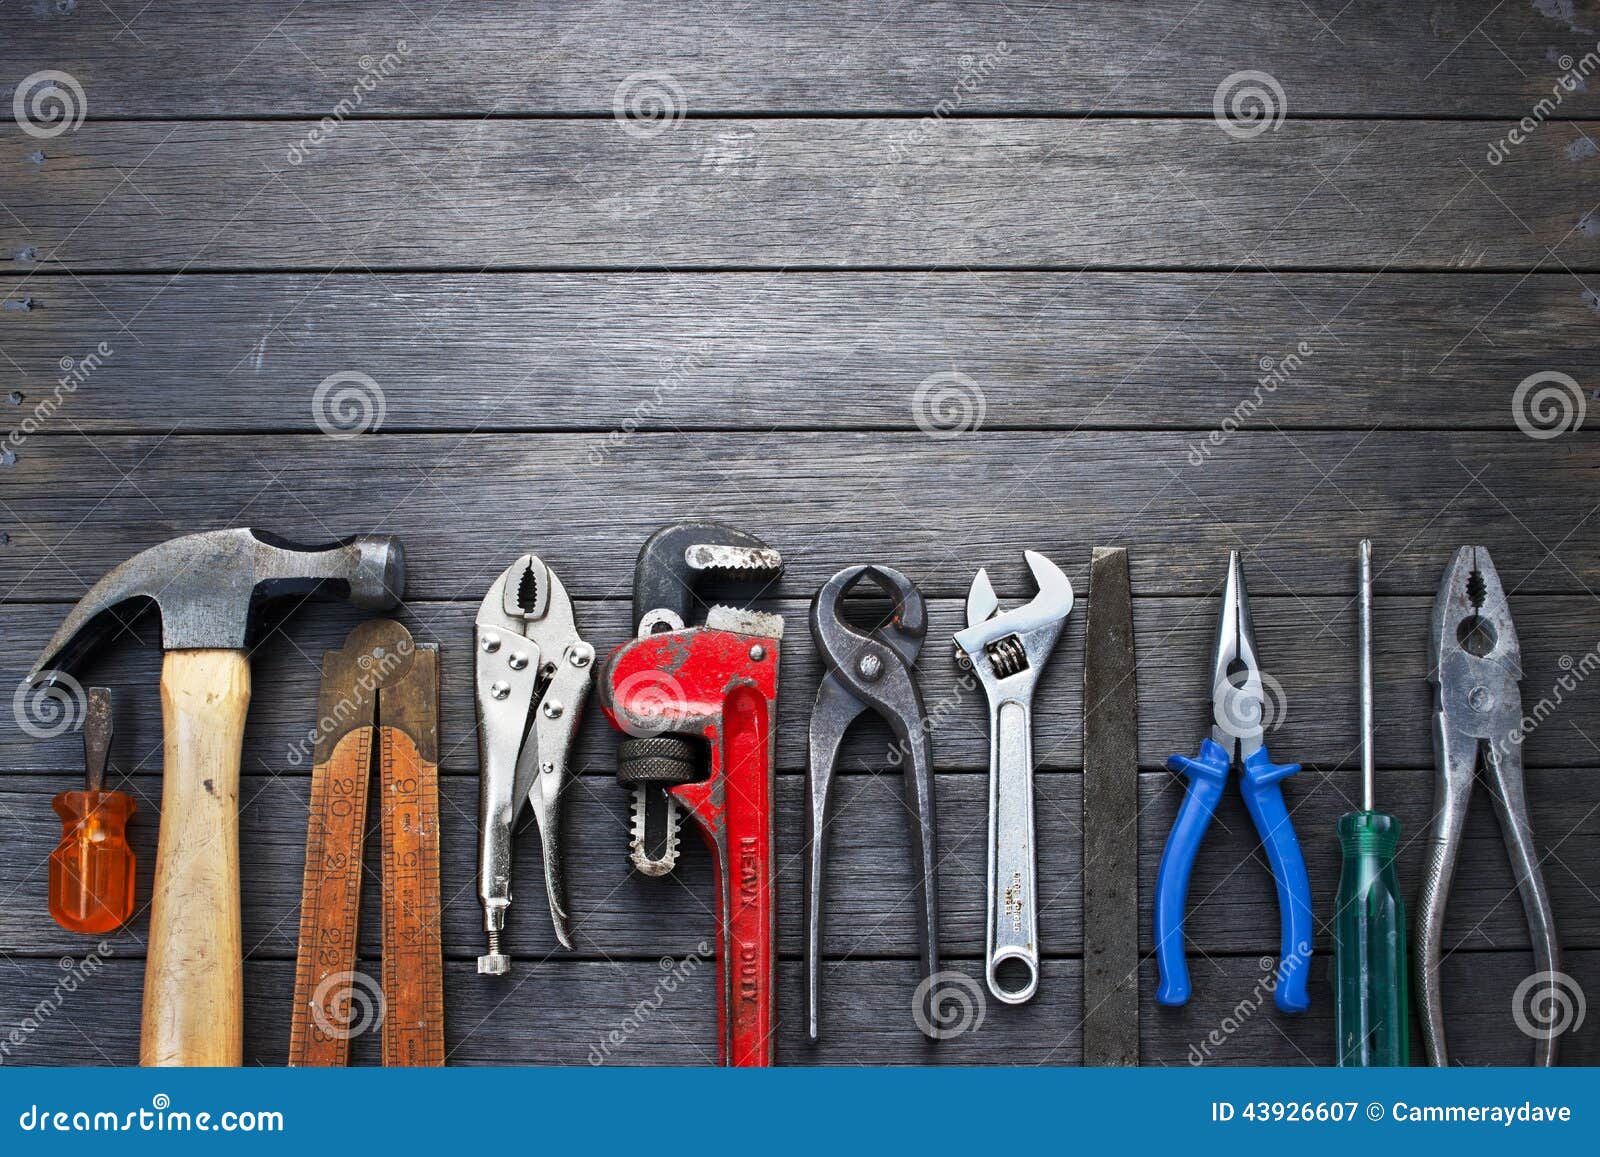 tools rustic wood background business construction